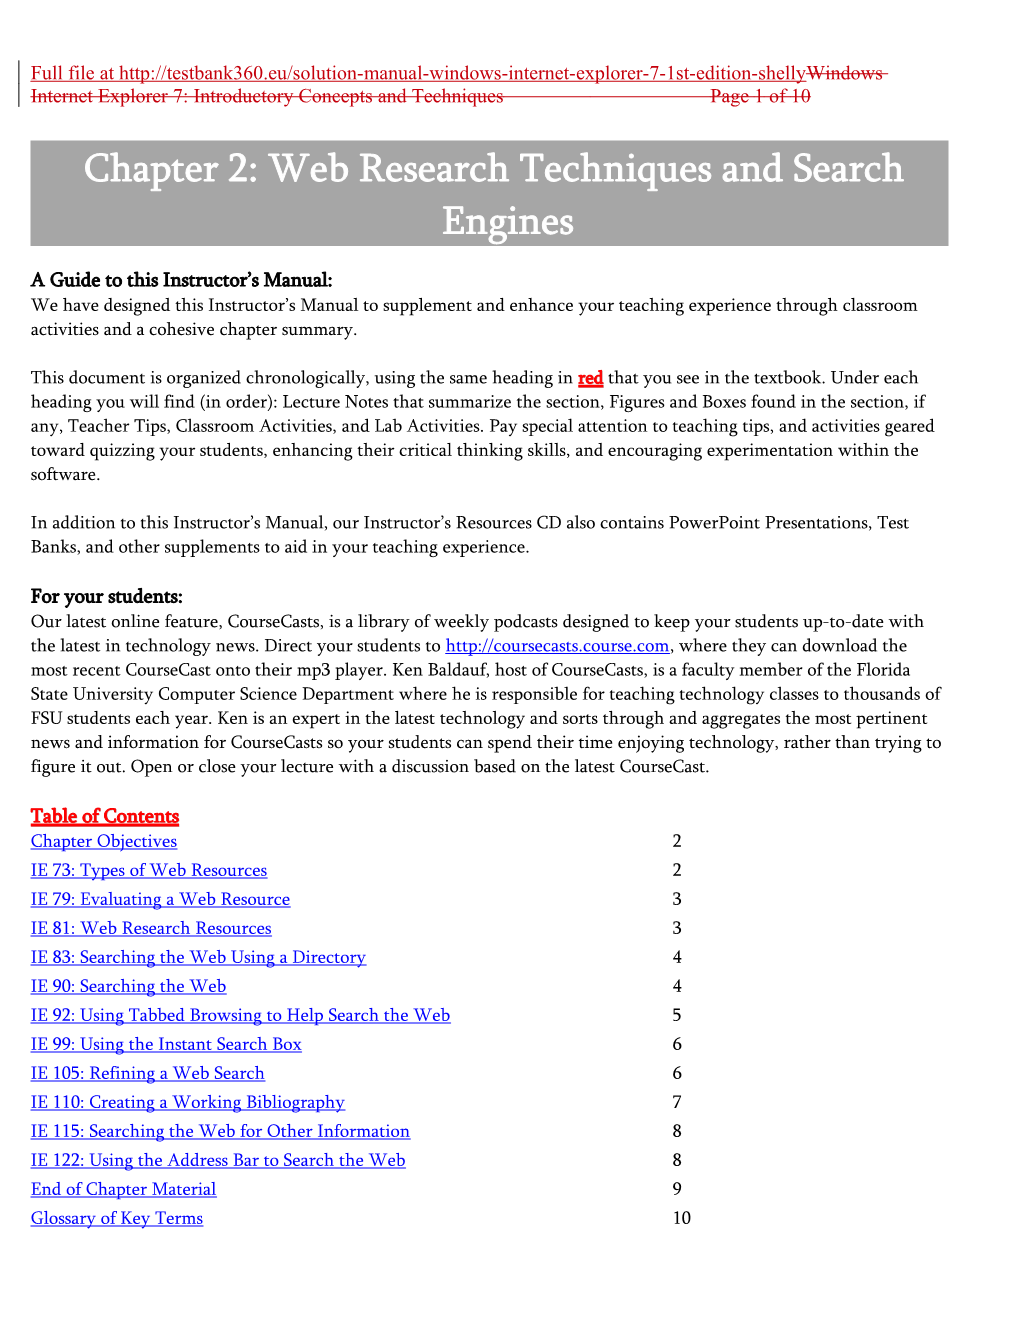 Chapter 2: Web Research Techniques and Search Engines